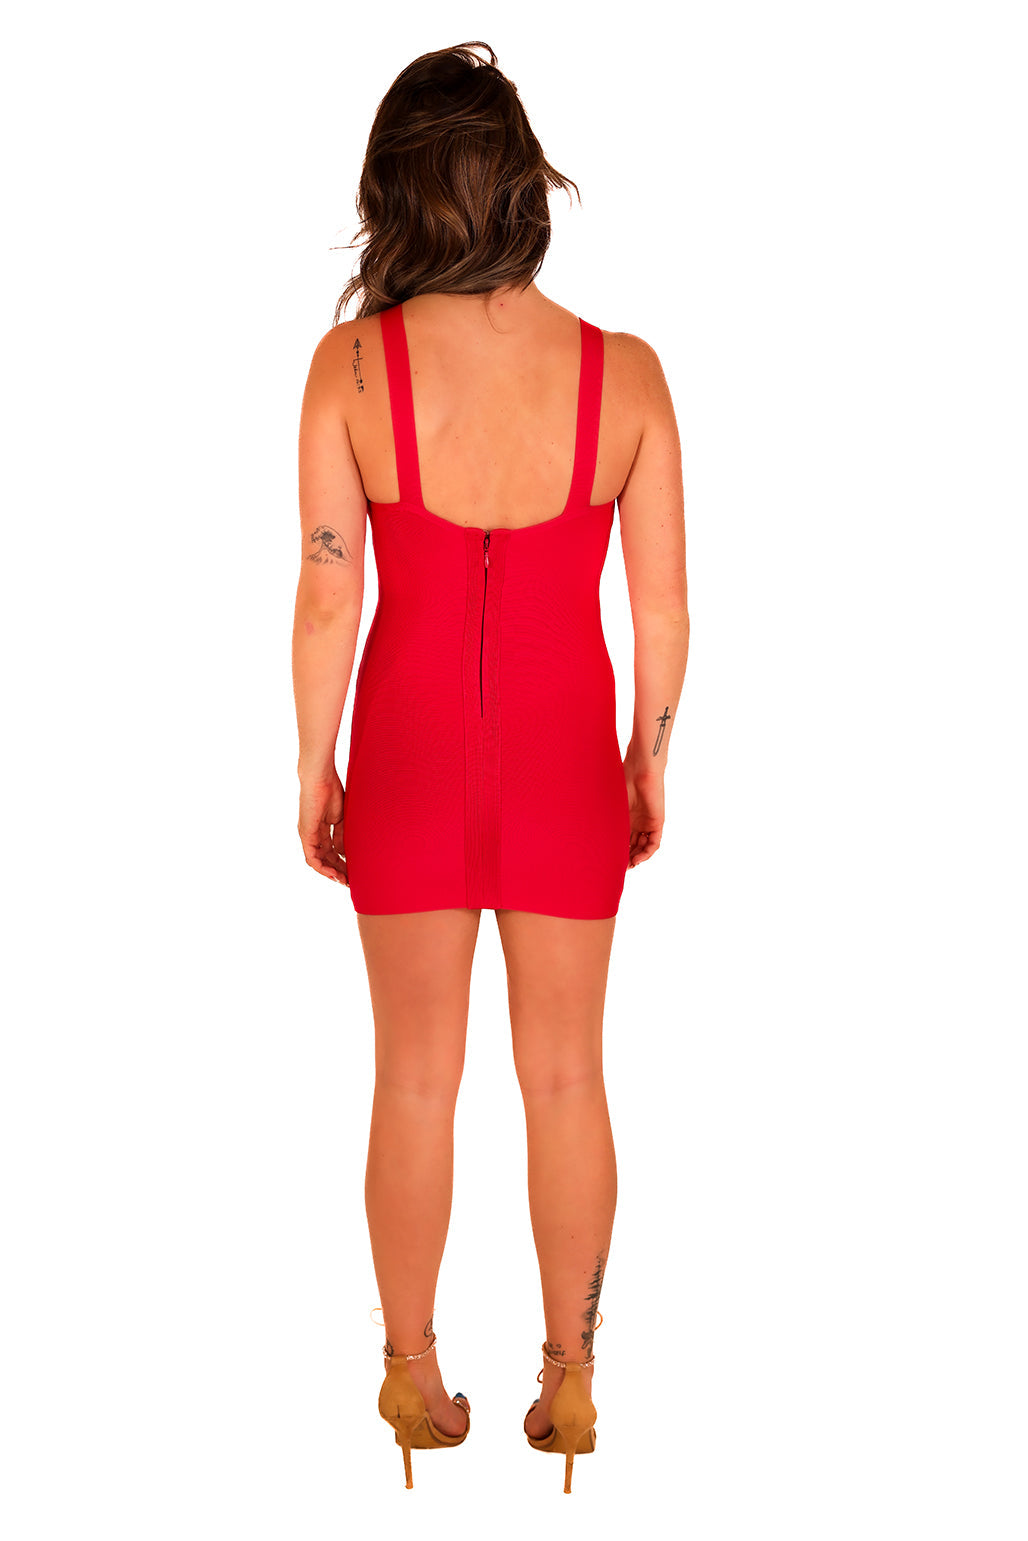 Sexy Red Bodycon Smoothing High Neck Mini Dress with Trending Cutouts1